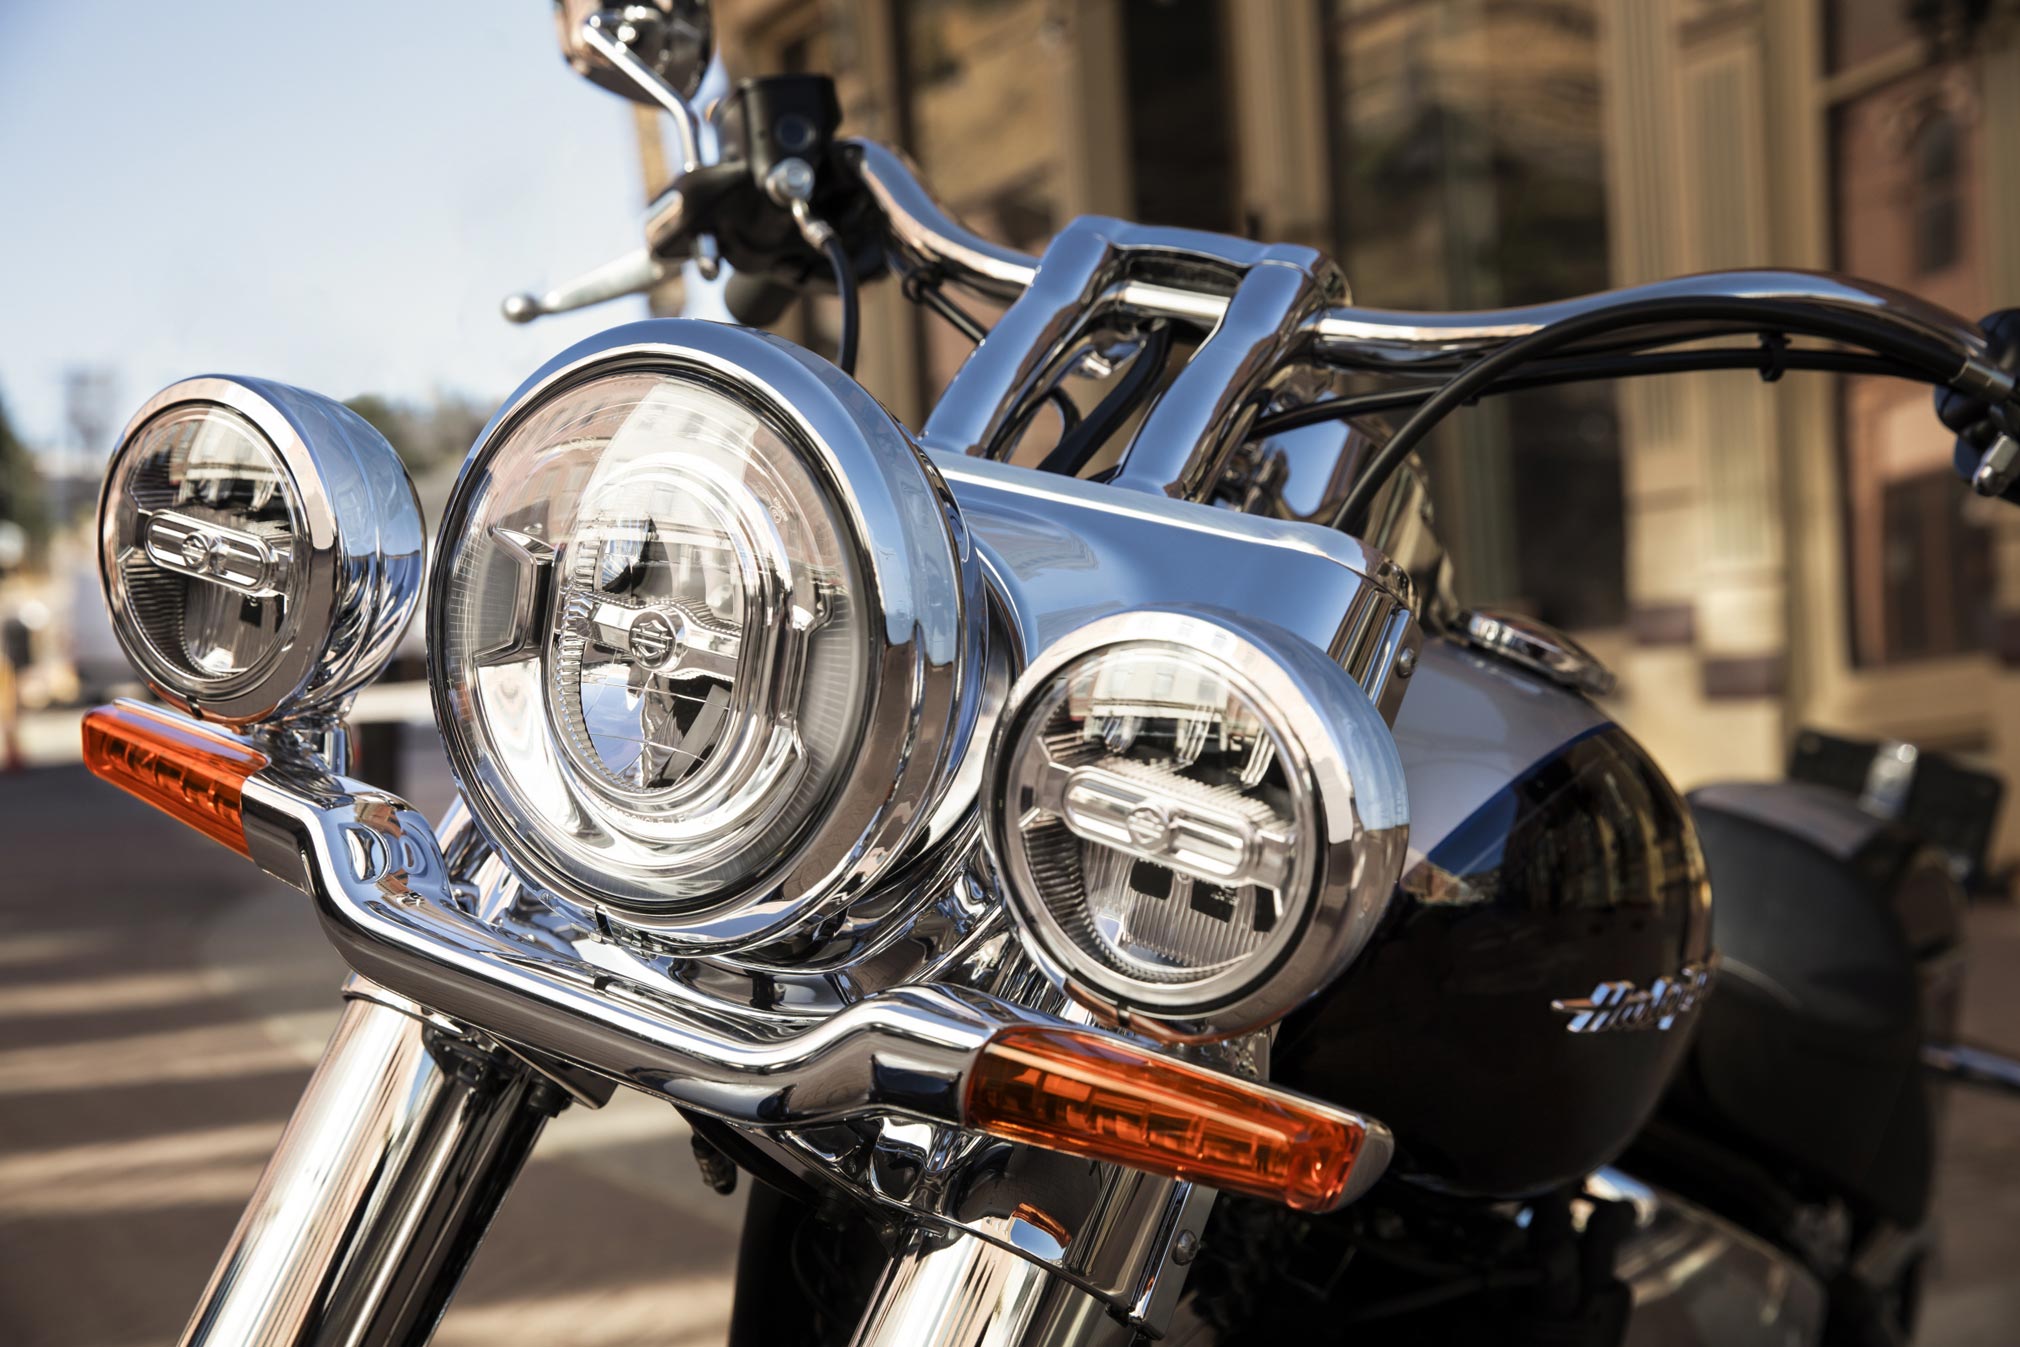 2020 Harley-Davidson Softail Deluxe Guide • Total Motorcycle